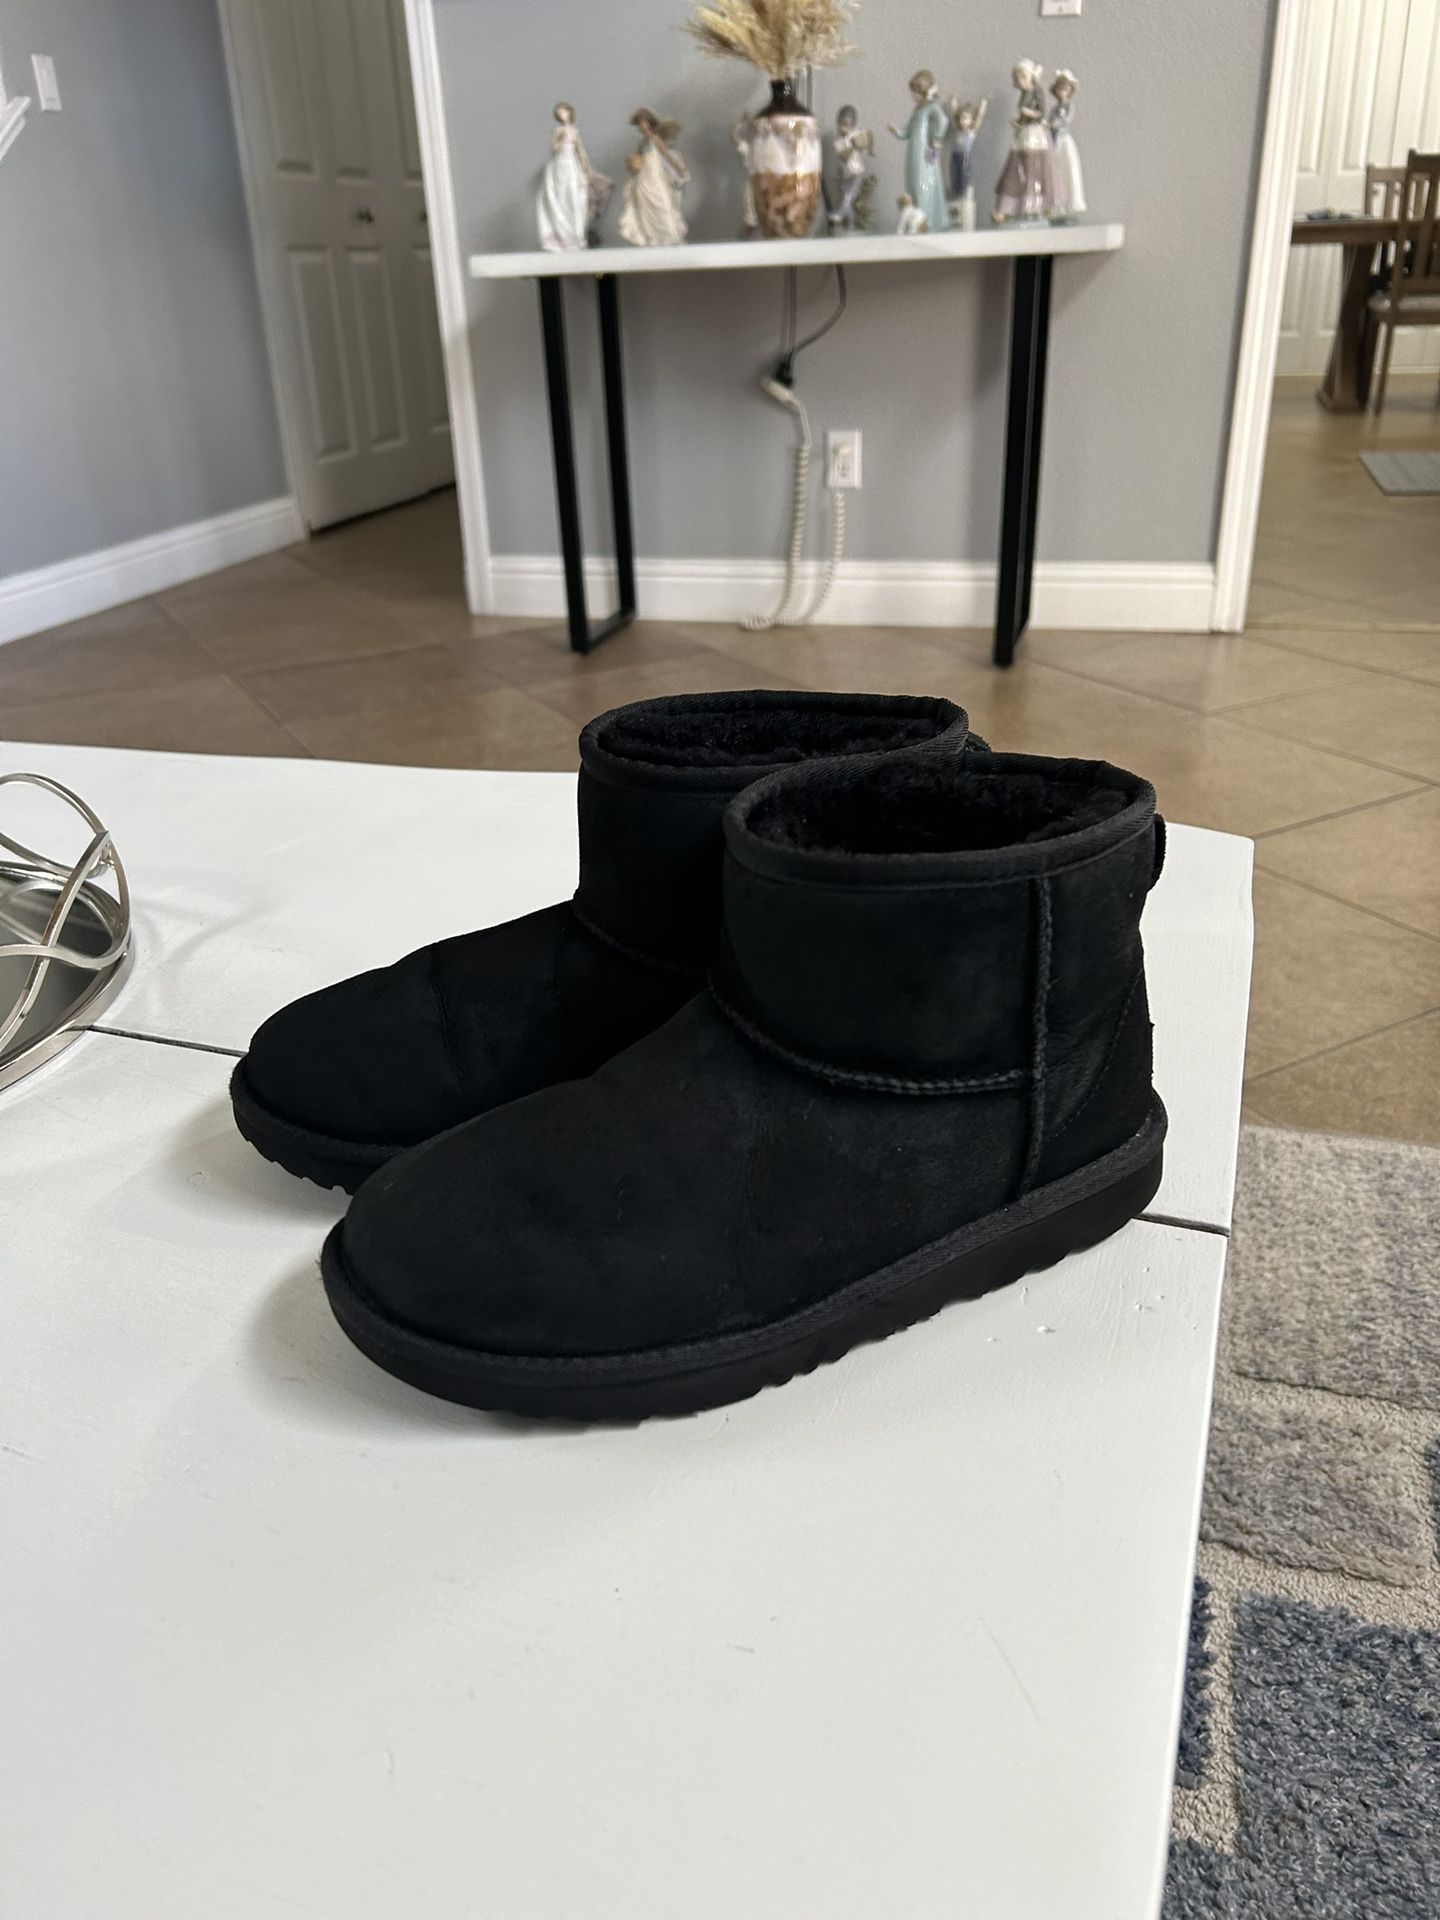 Uggs Size 5 US